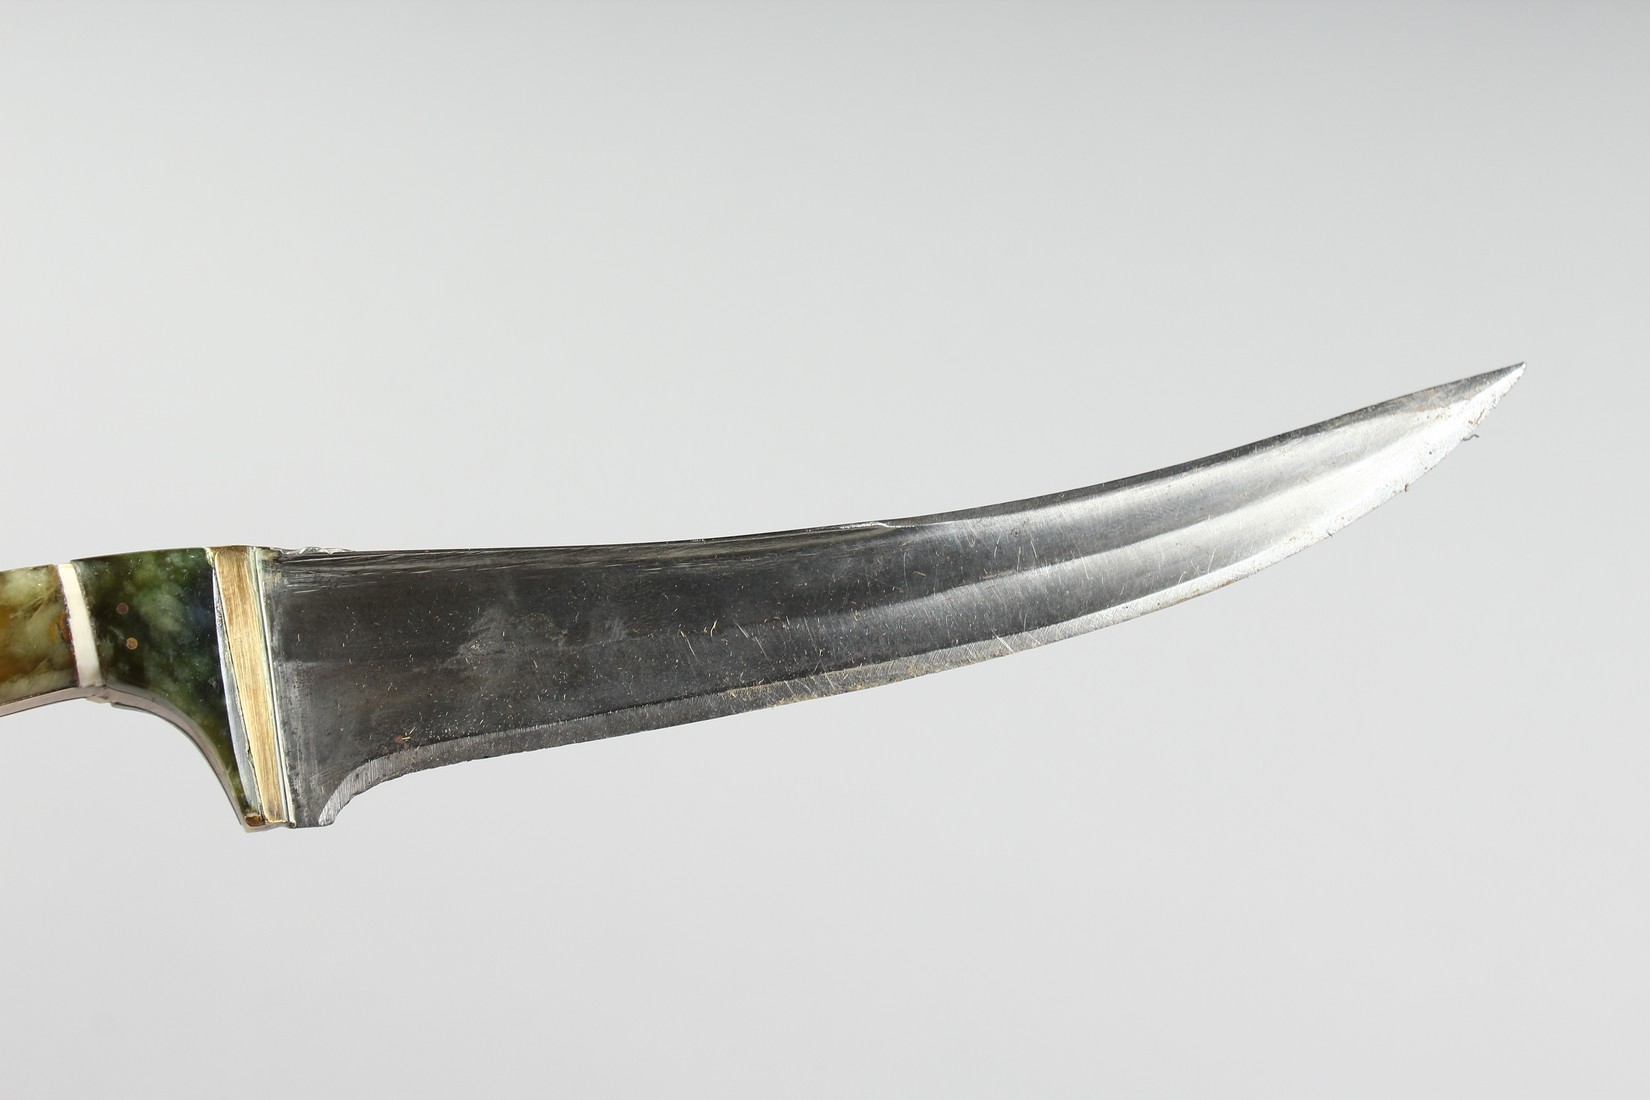 AN INDIAN JADE HANDLED DAGGER, with curving blade and wooden sheath, 35cm long overall. - Image 2 of 5